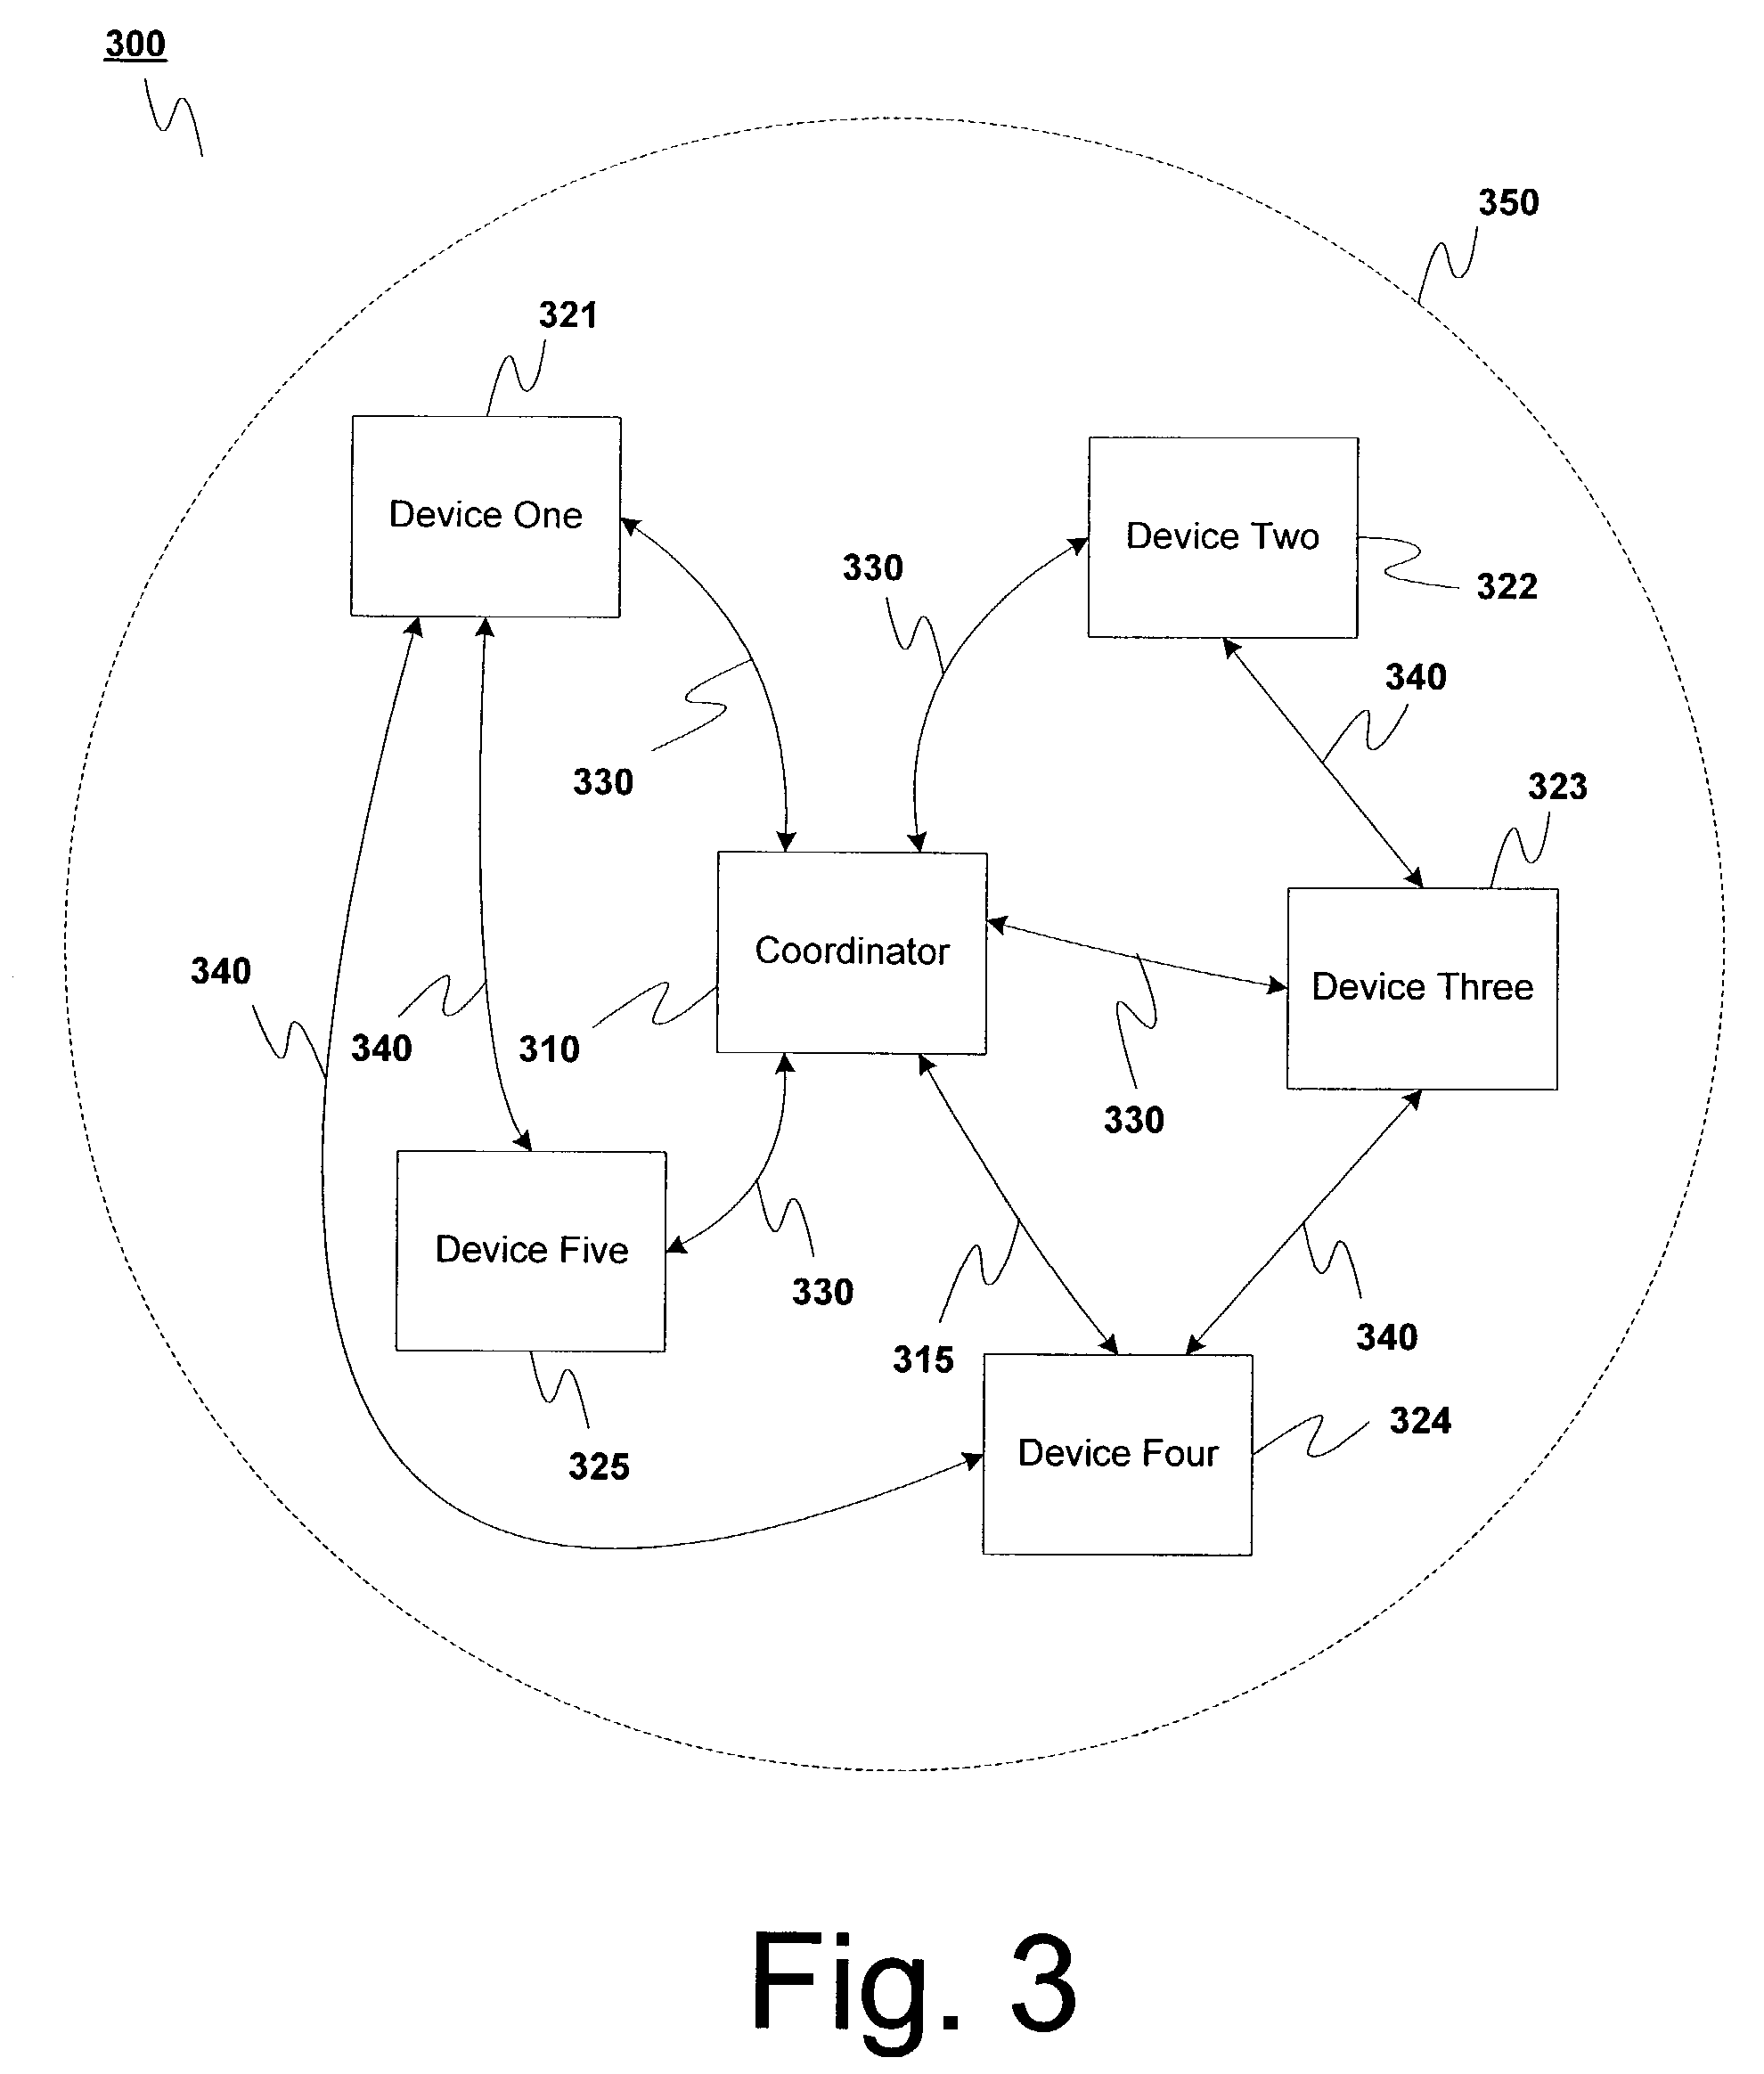 System and method for providing device authentication in a wireless network